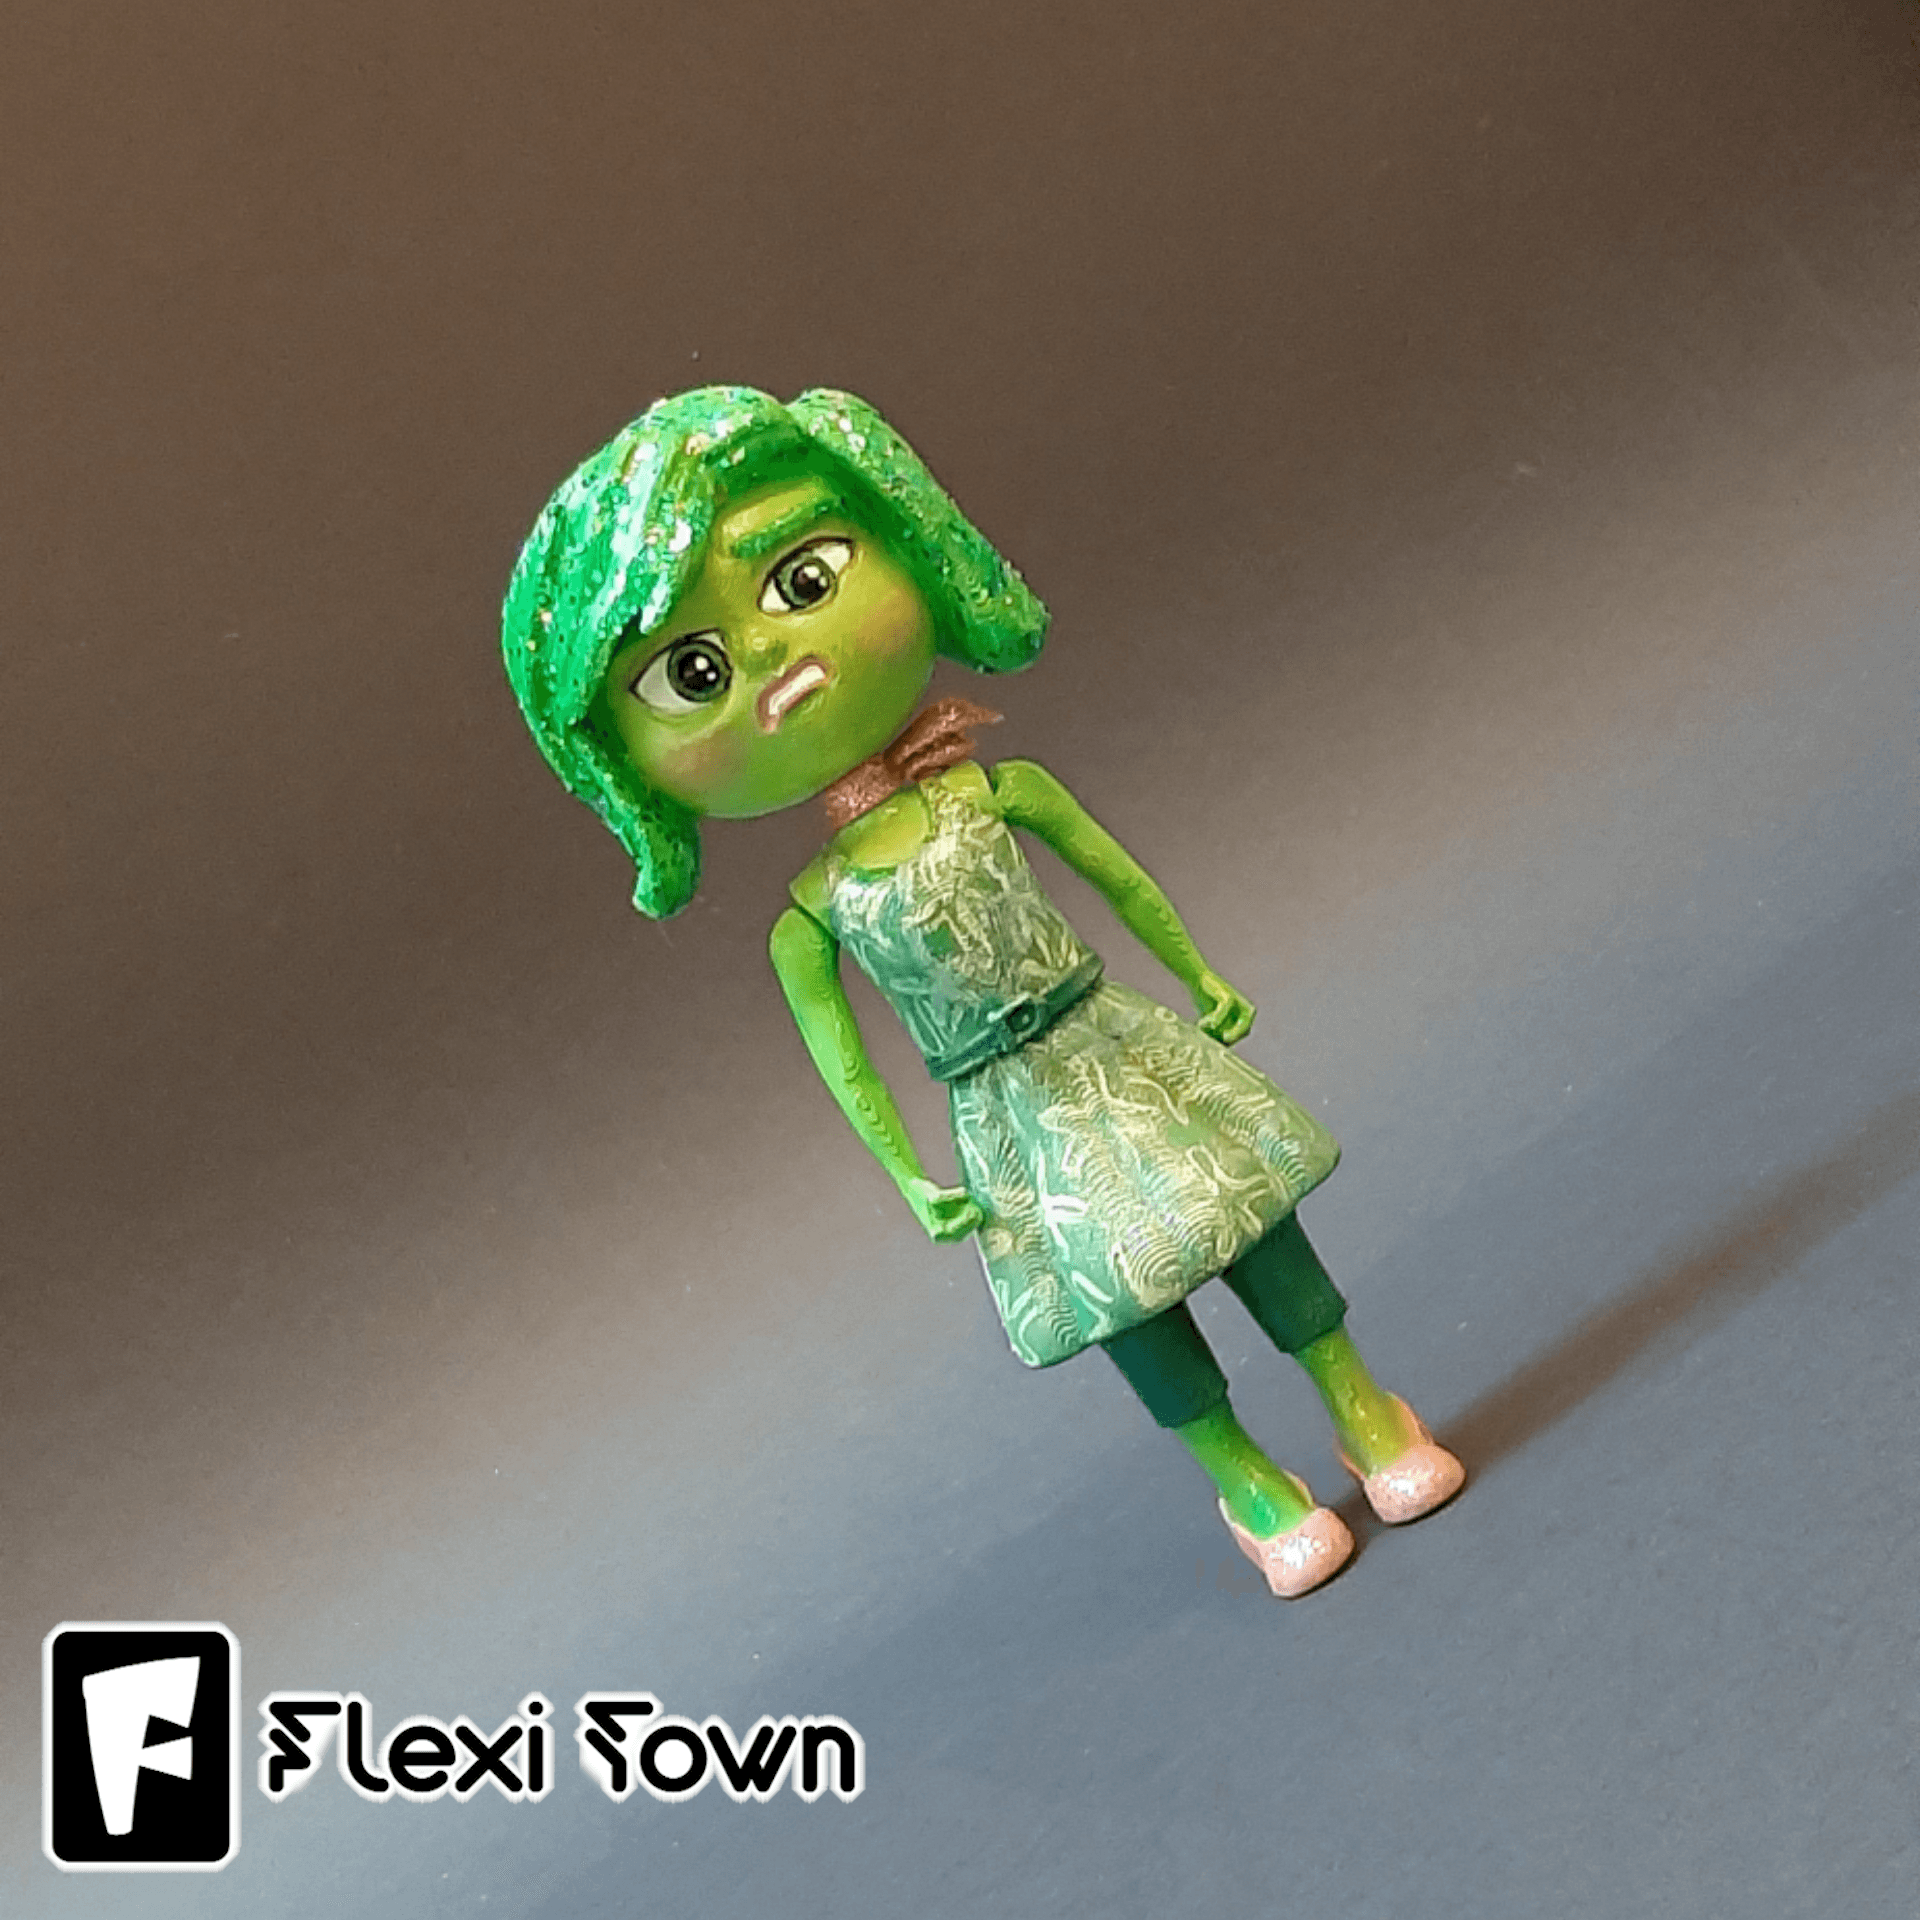 🎉 New Arrival: Flexi Disgust from Inside Out! 🎉